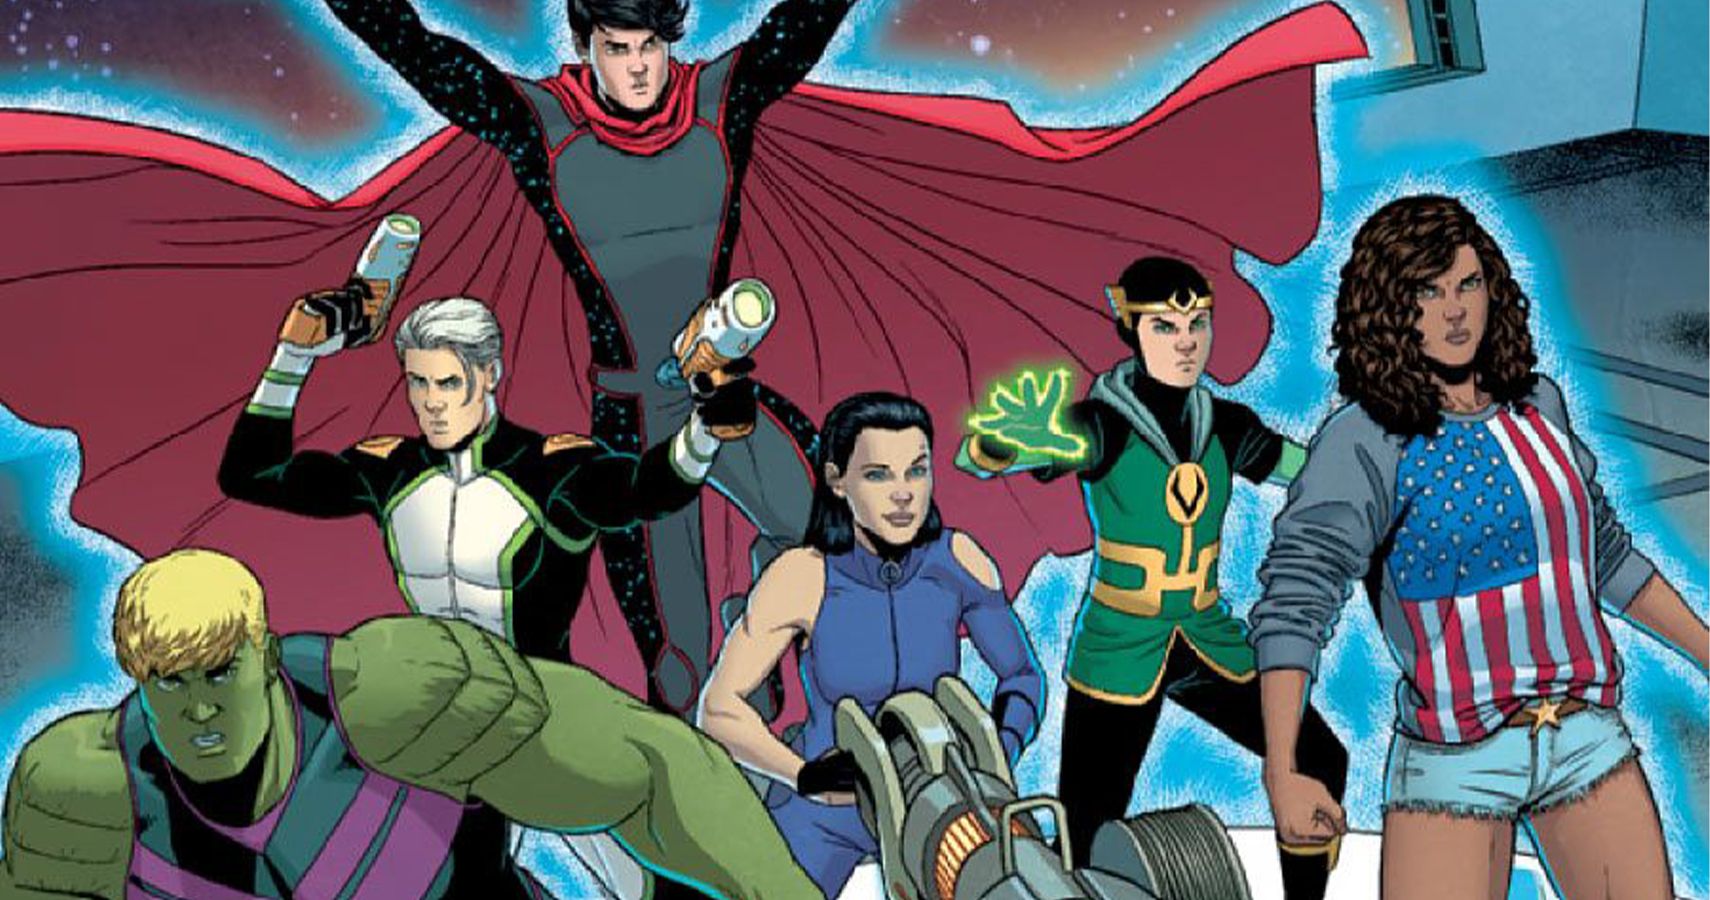 Young-Avengers-Team-Pose-Featured-Image.jpg